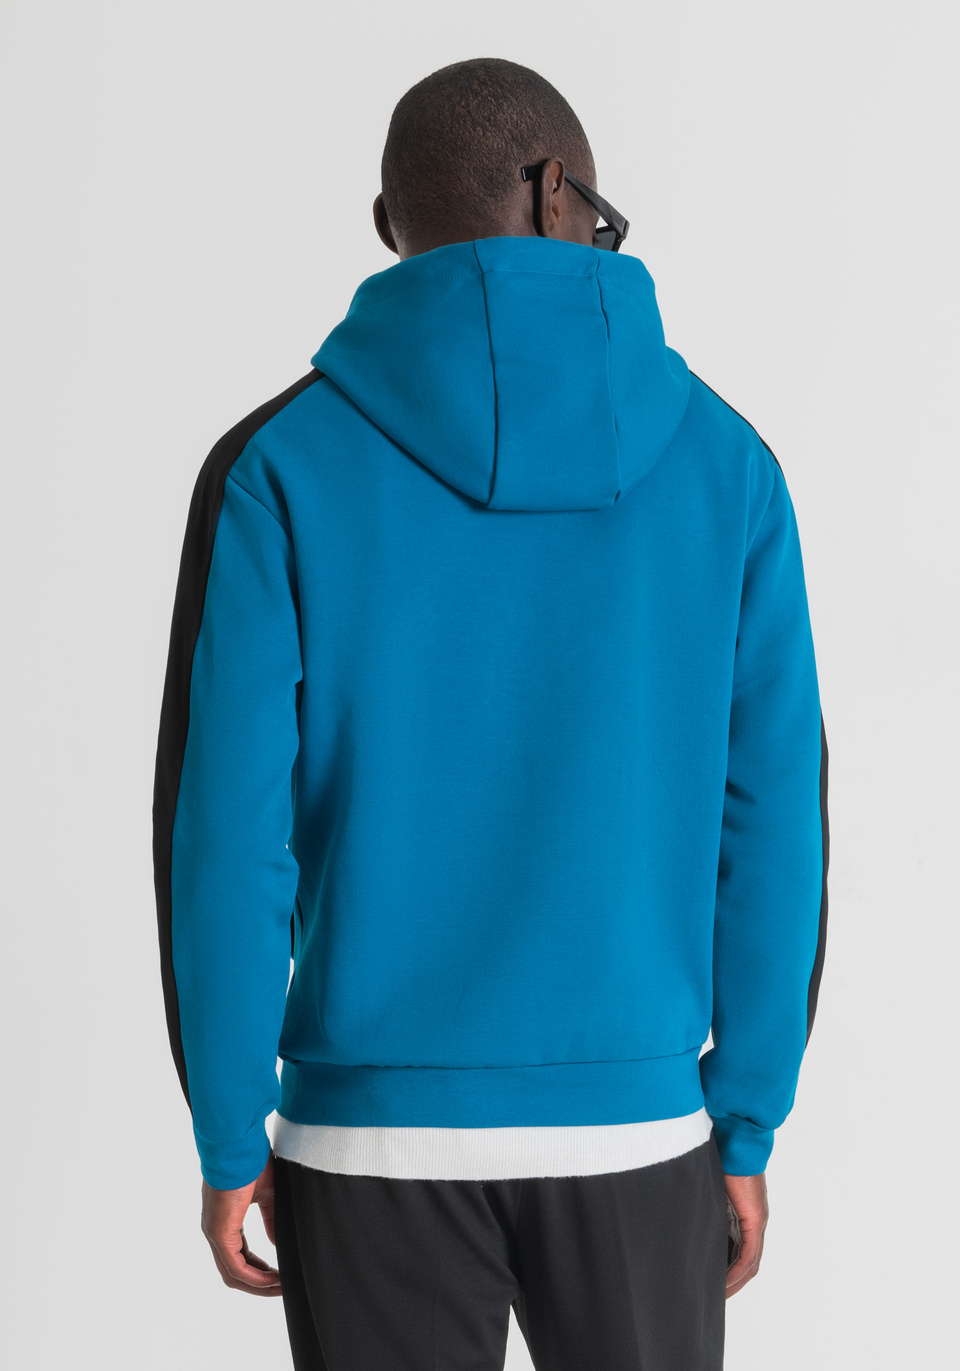 REGULAR-FIT SWEATSHIRT WITH CONTRASTING TECHNICAL FABRIC DETAILS AND HOOD - Antony Morato Online Shop